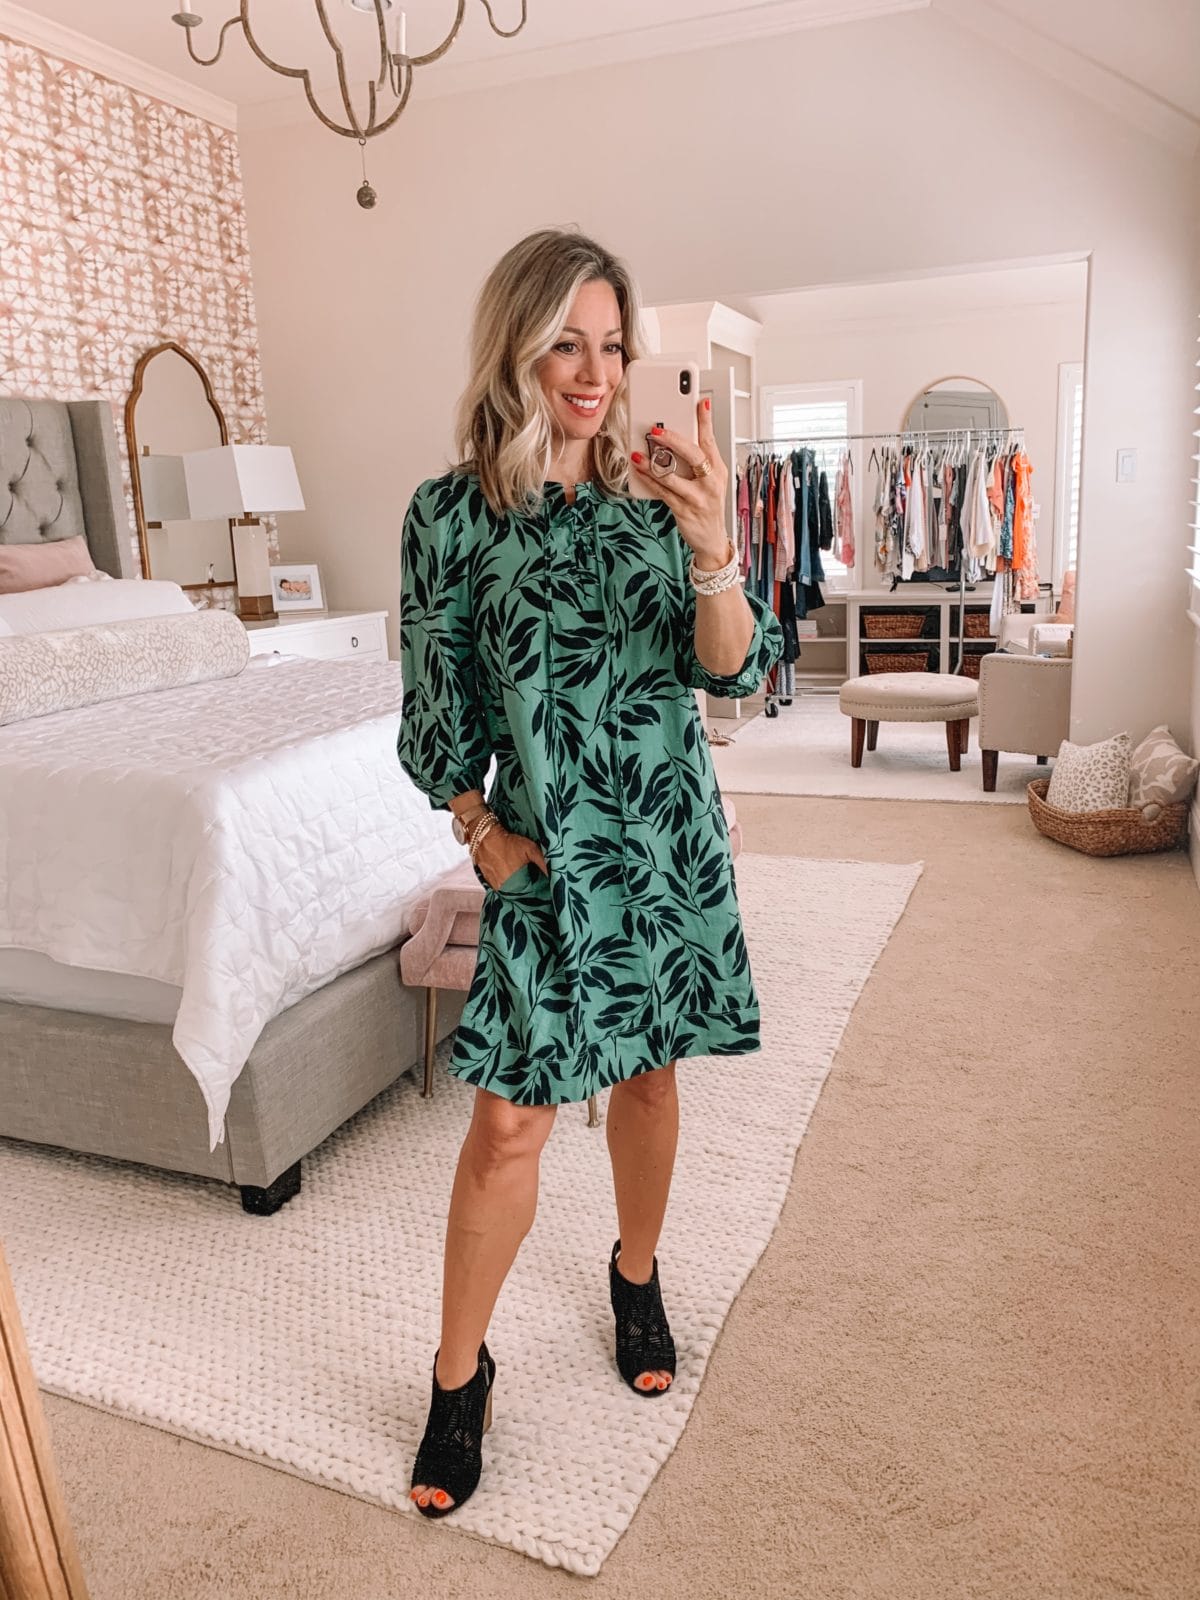 Dressing Room Finds Nordstrom and Target, Green Palm Print Sift Dress, Booties